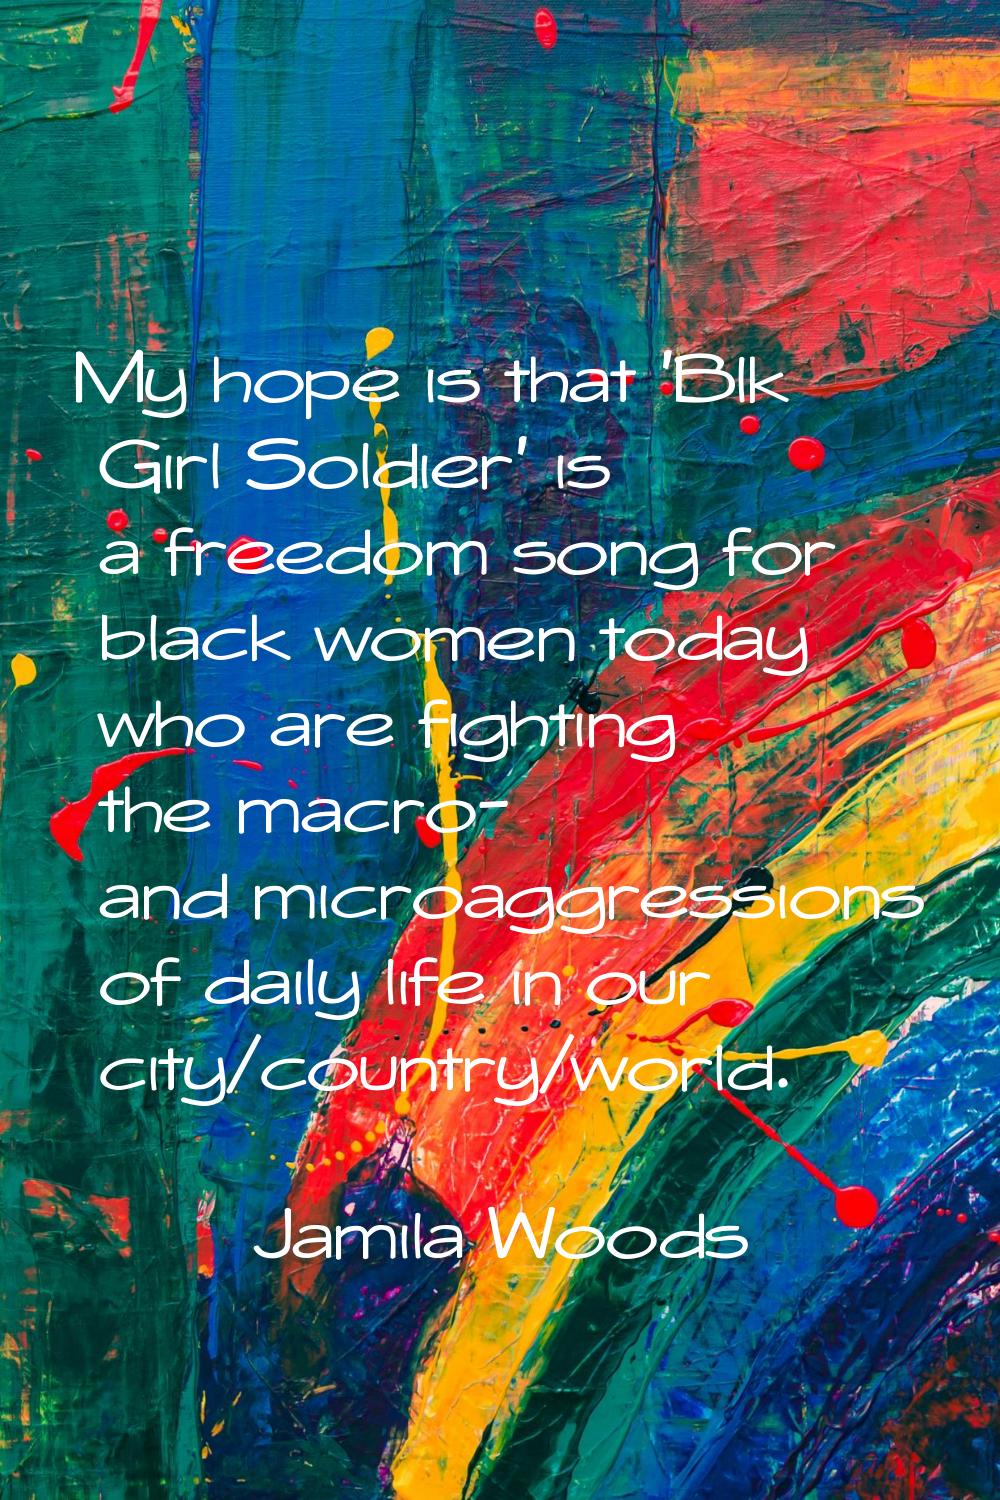 My hope is that 'Blk Girl Soldier' is a freedom song for black women today who are fighting the mac